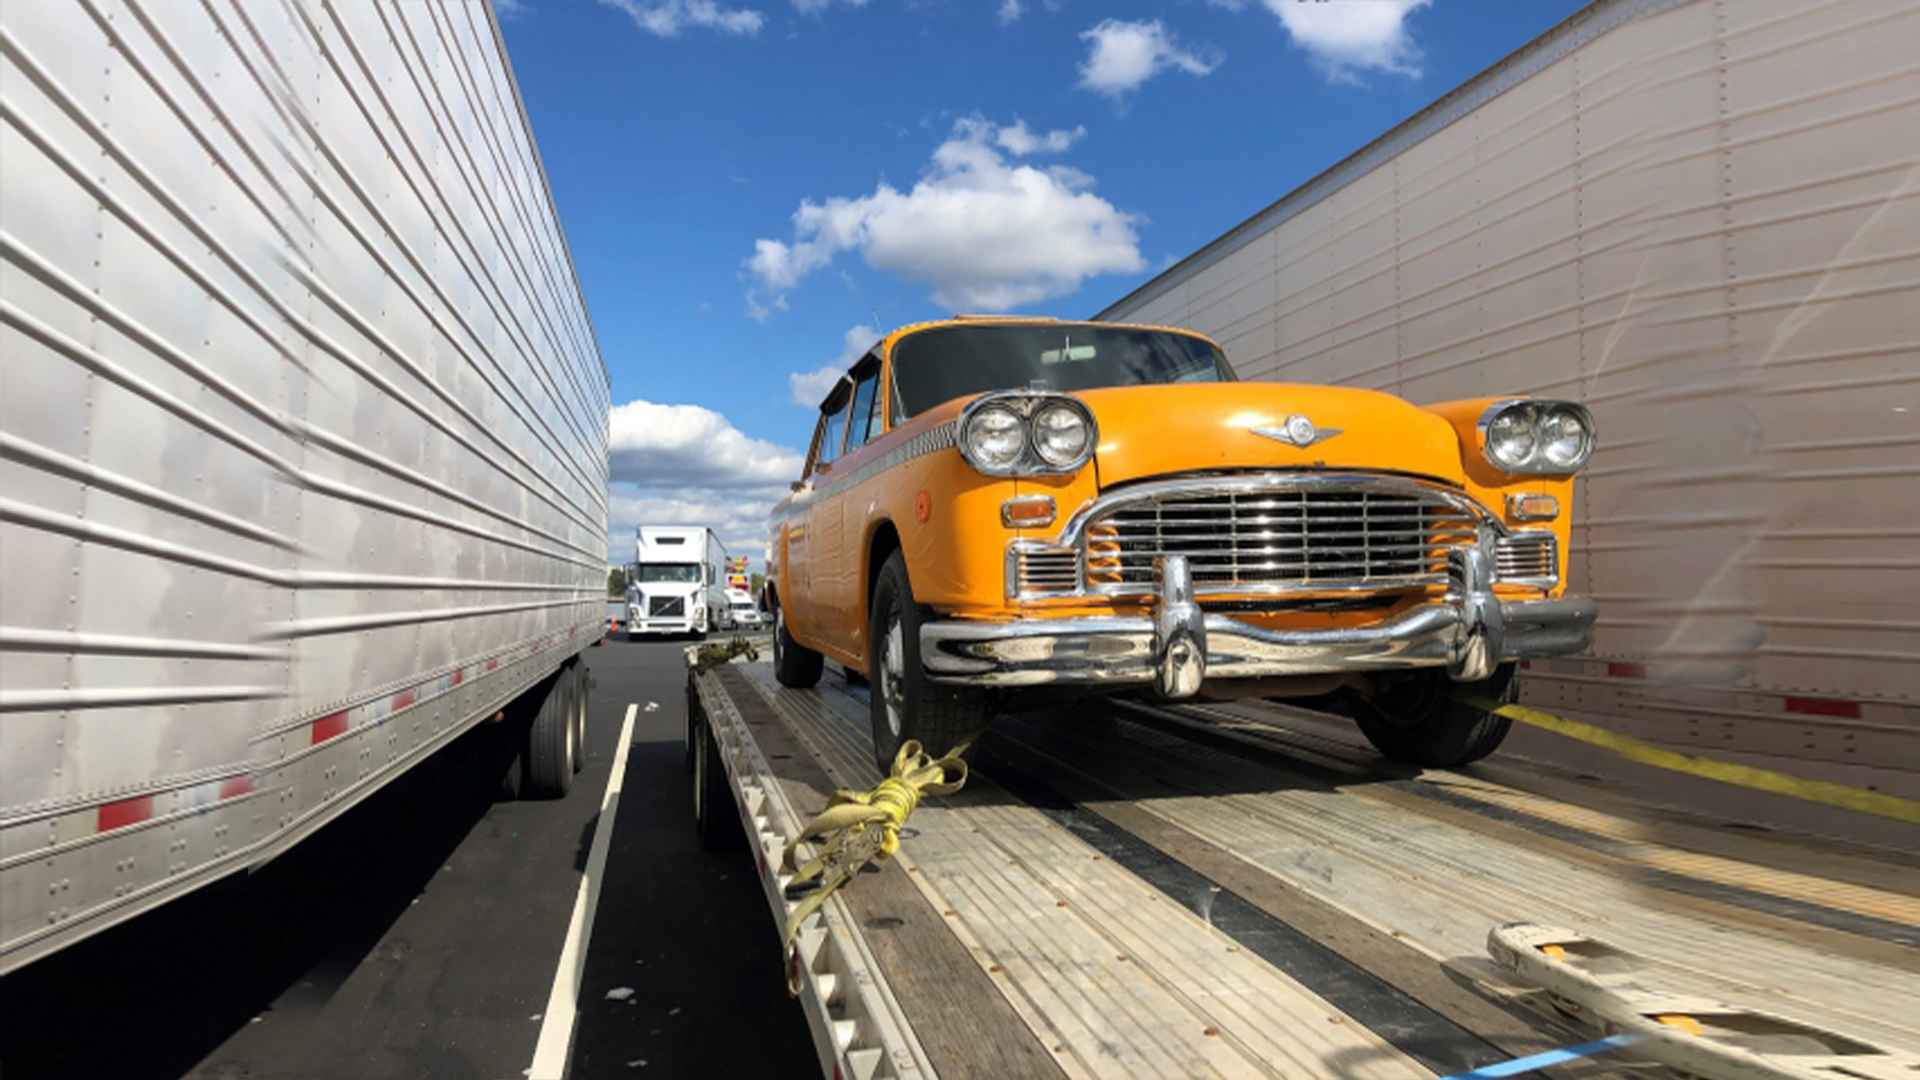 Classic yellow cab tied to trailer